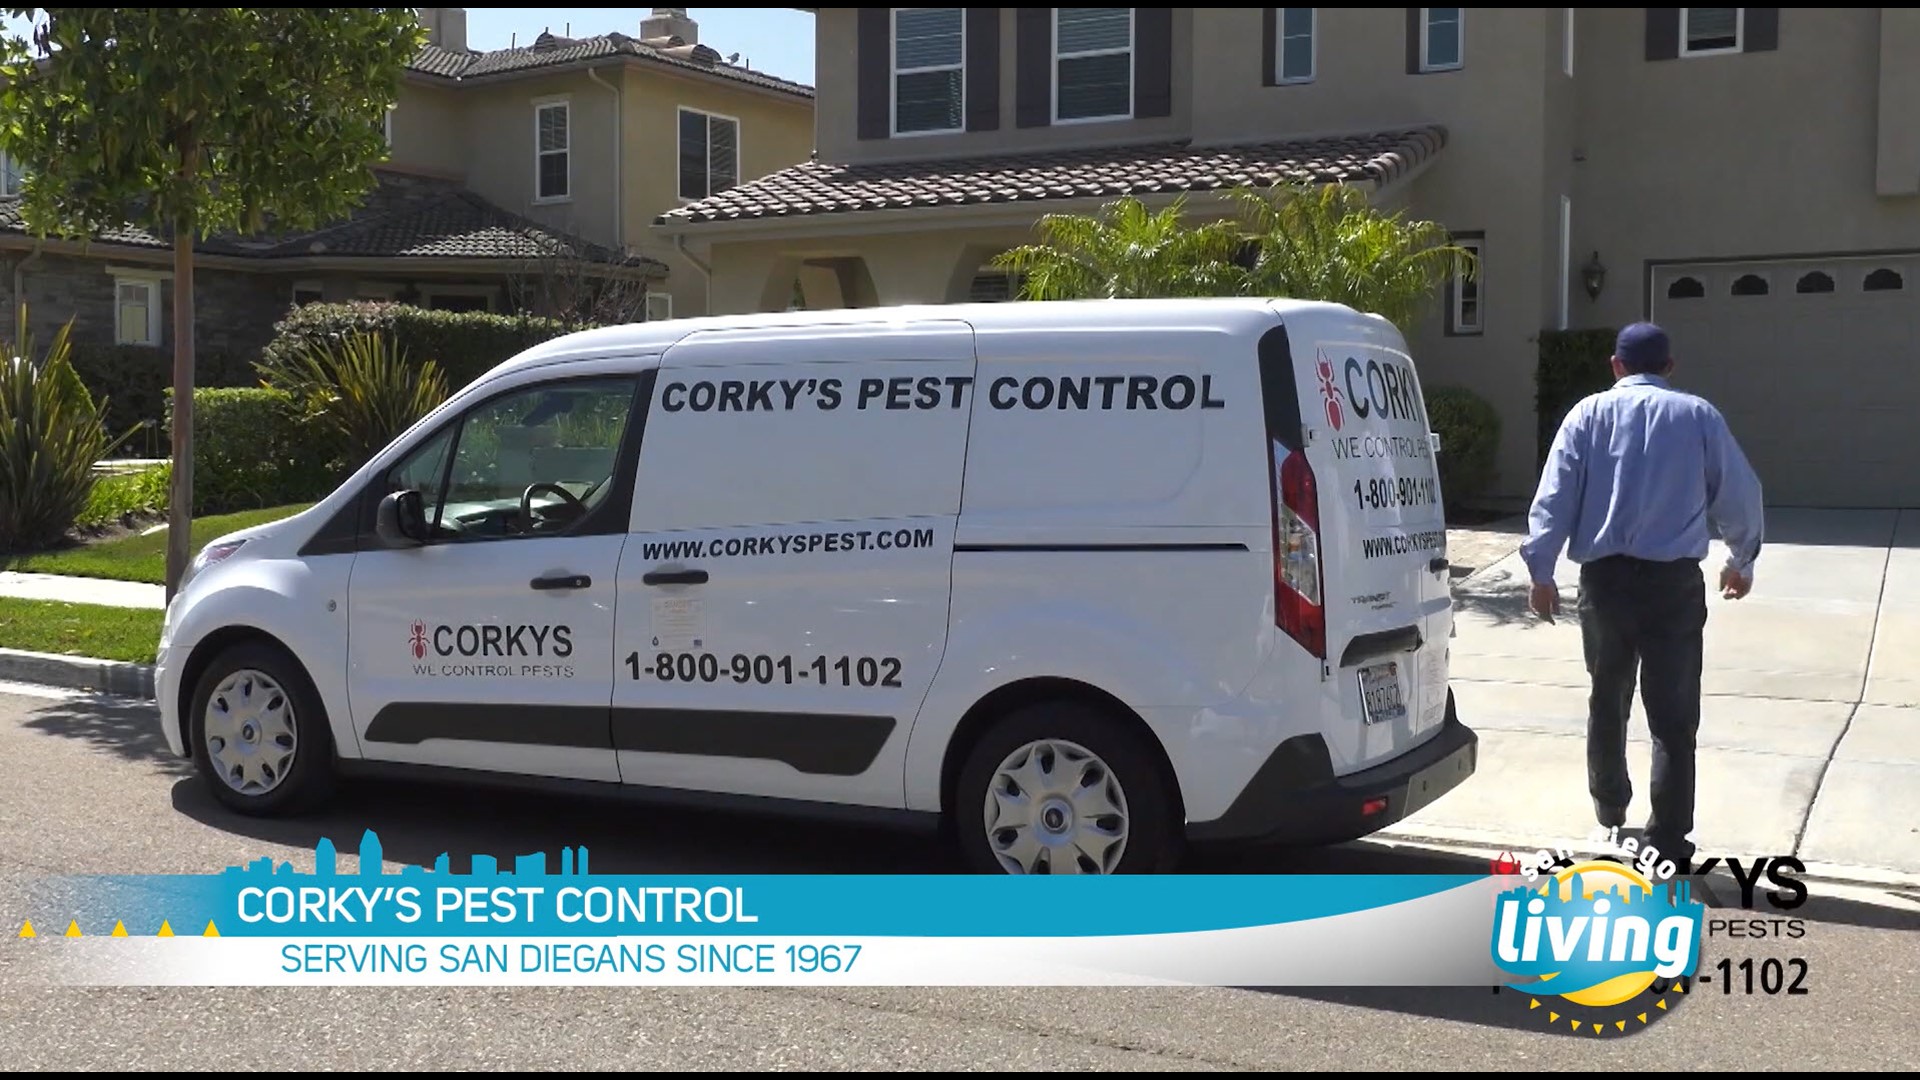 As summer temperatures begin to rise, so does the population of pests. Segment sponsored by Corky's Pest Control.